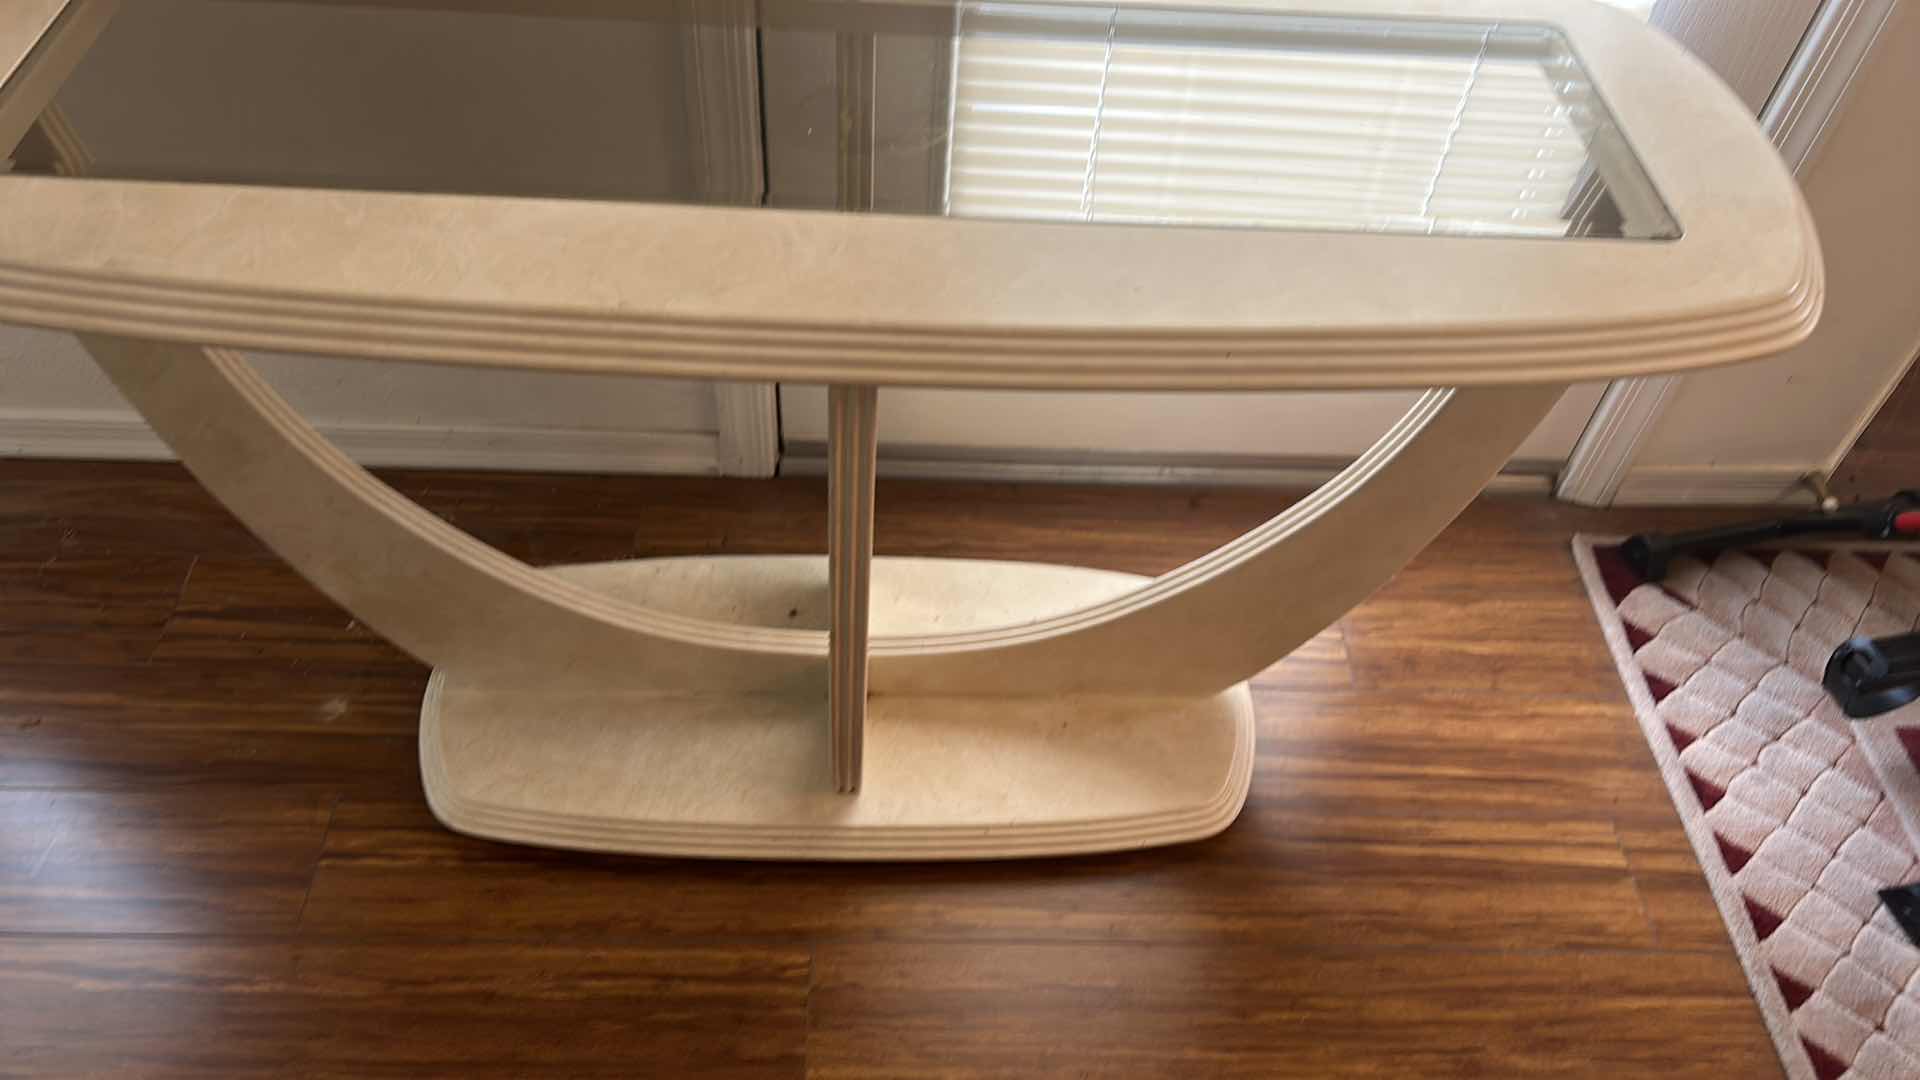 Photo 3 of CONTEMPORARY CREAM ENTRY TABLE, METAL W GLASS TOP 49” x 20” x 27”